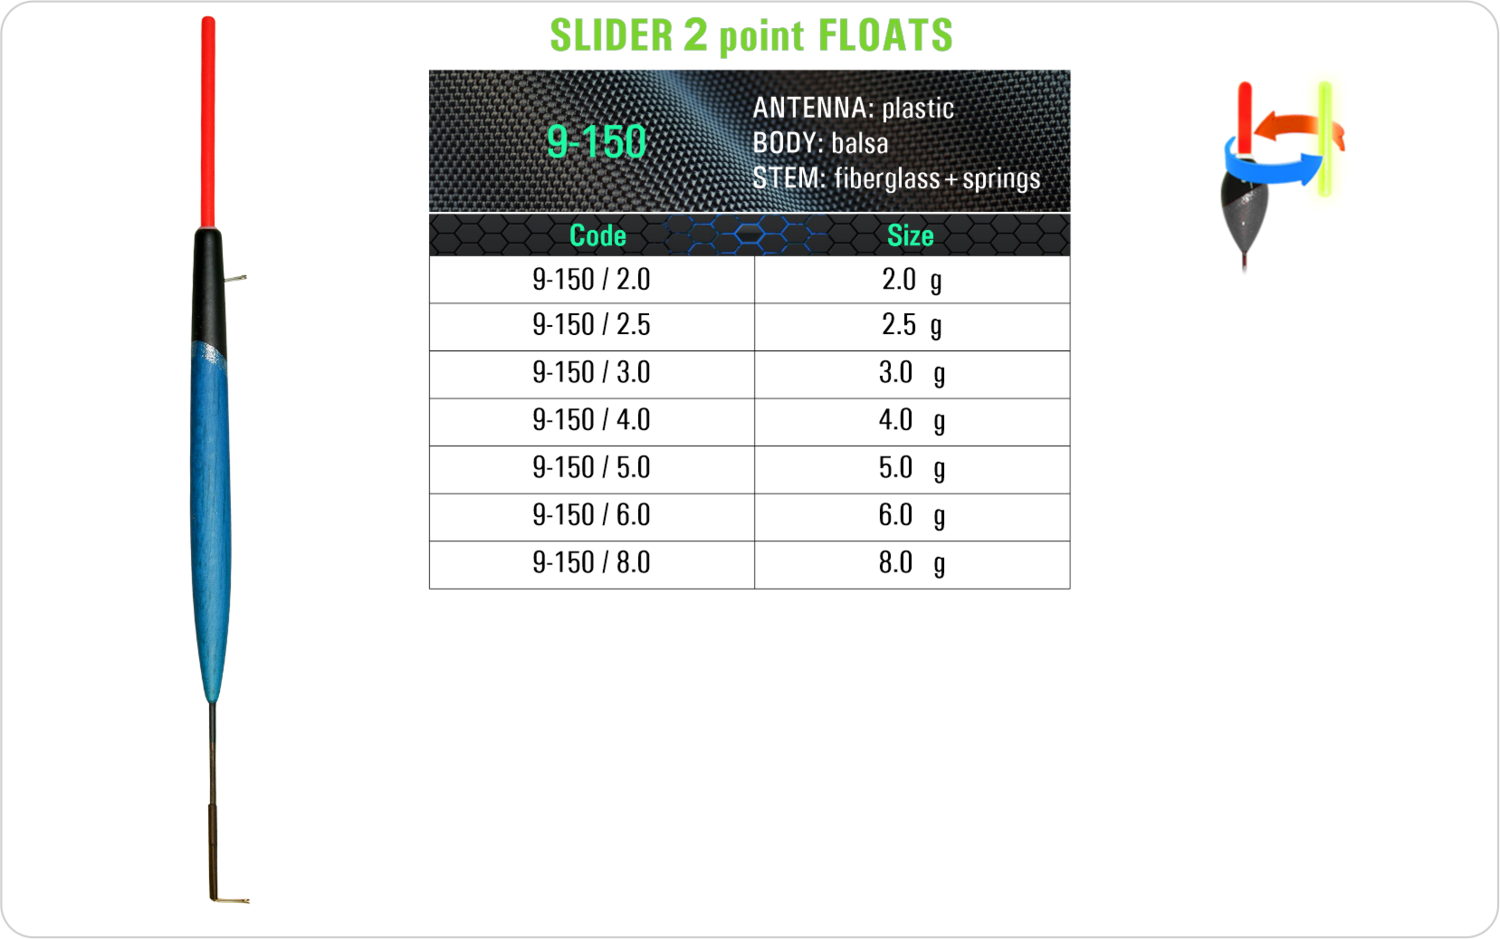 SF 9-150 - Lake and river float model and table containing an additional information about this float with different codes, sizes, types of the body, the stem and the antenna of the float.